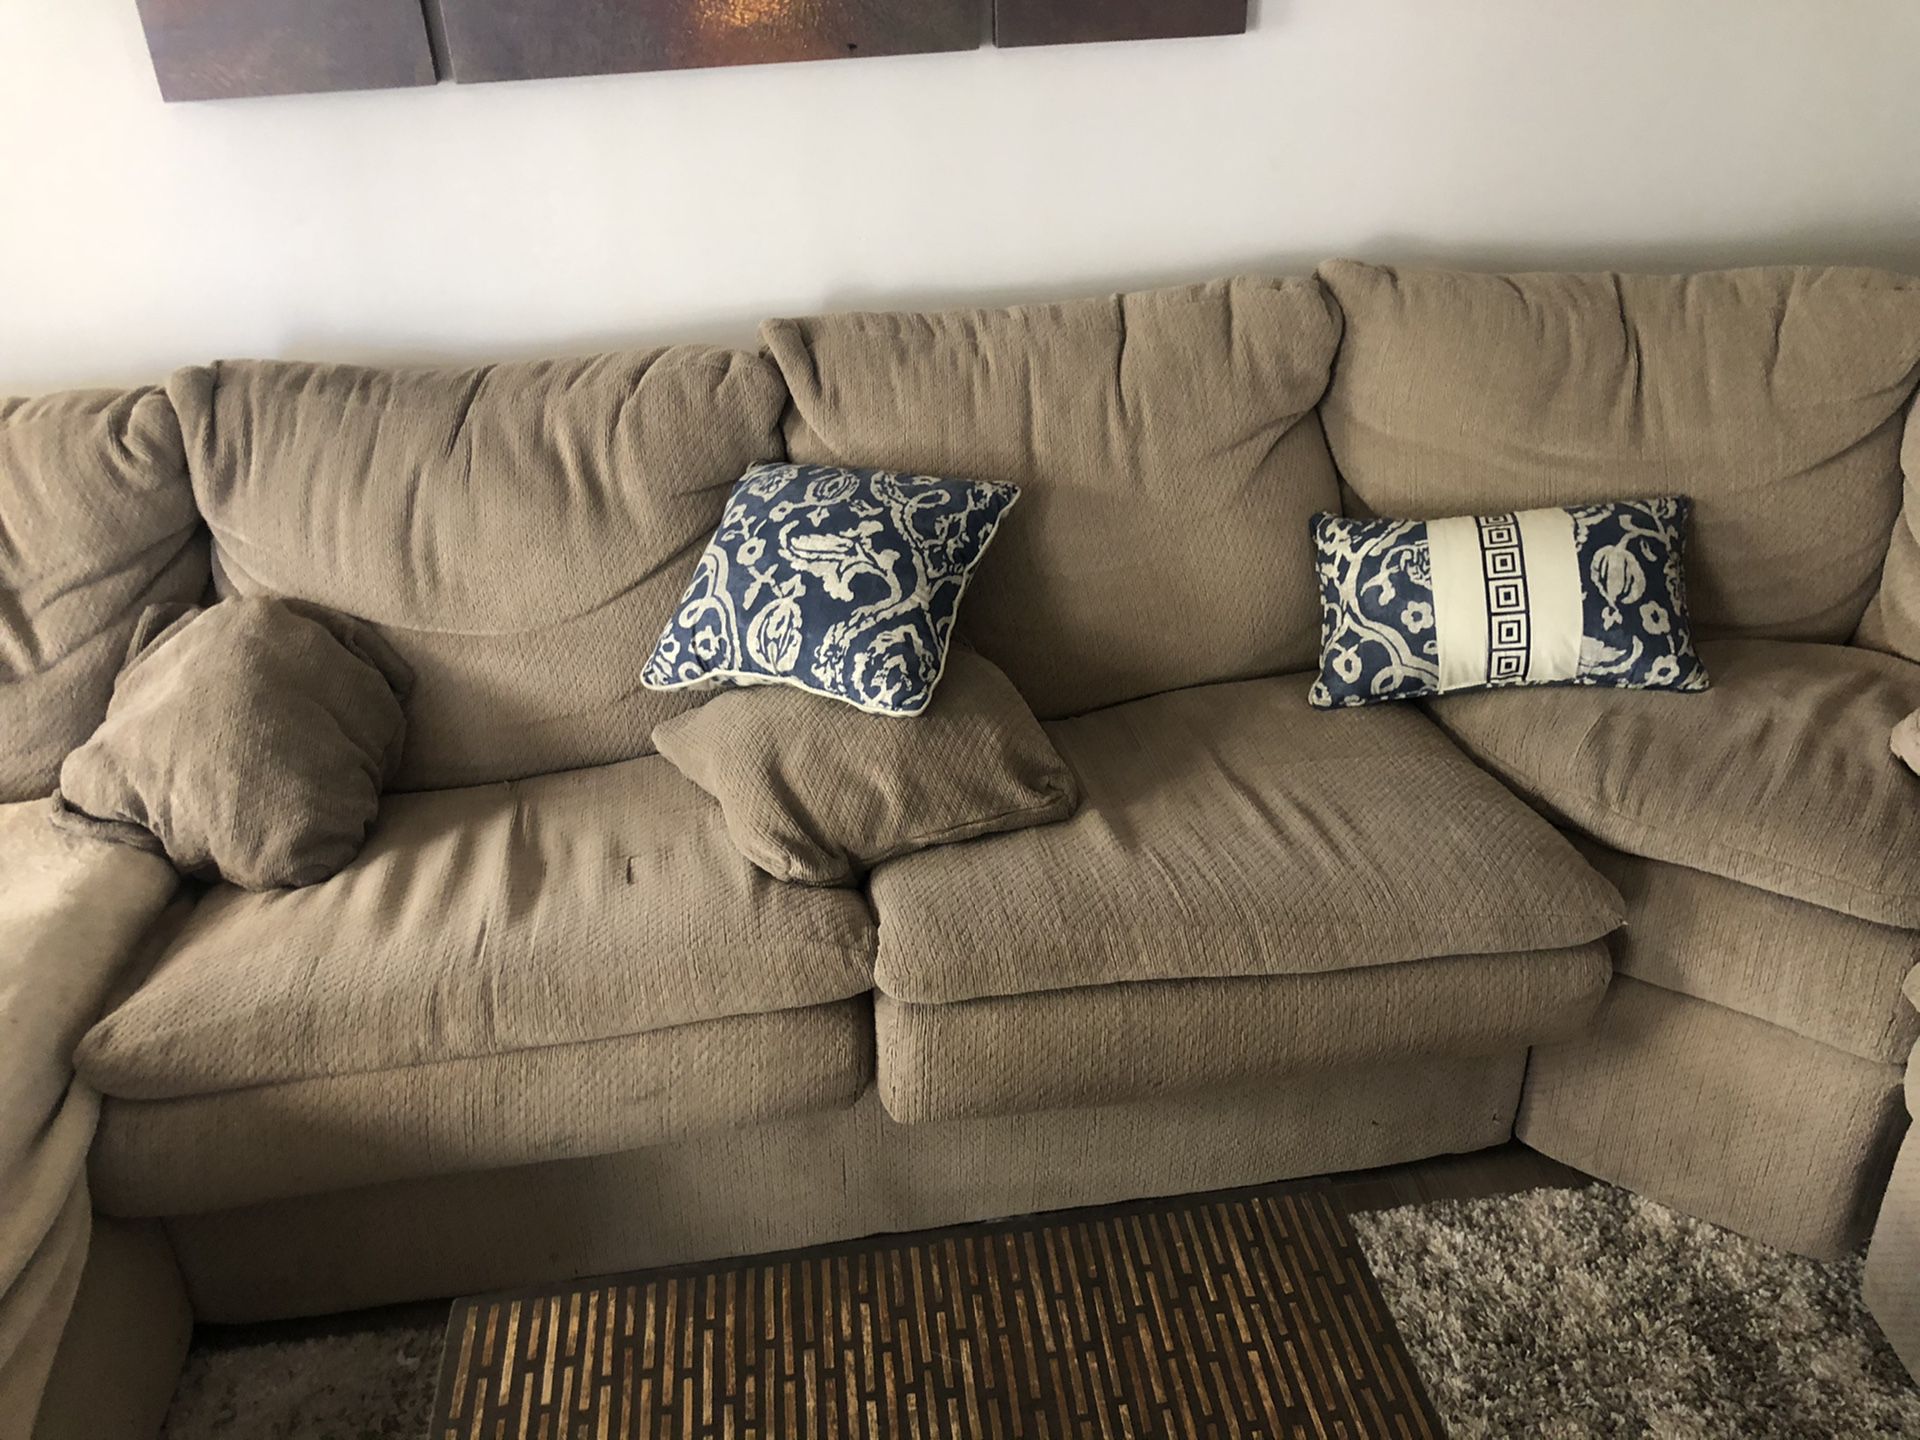 Tan 5 seat couch